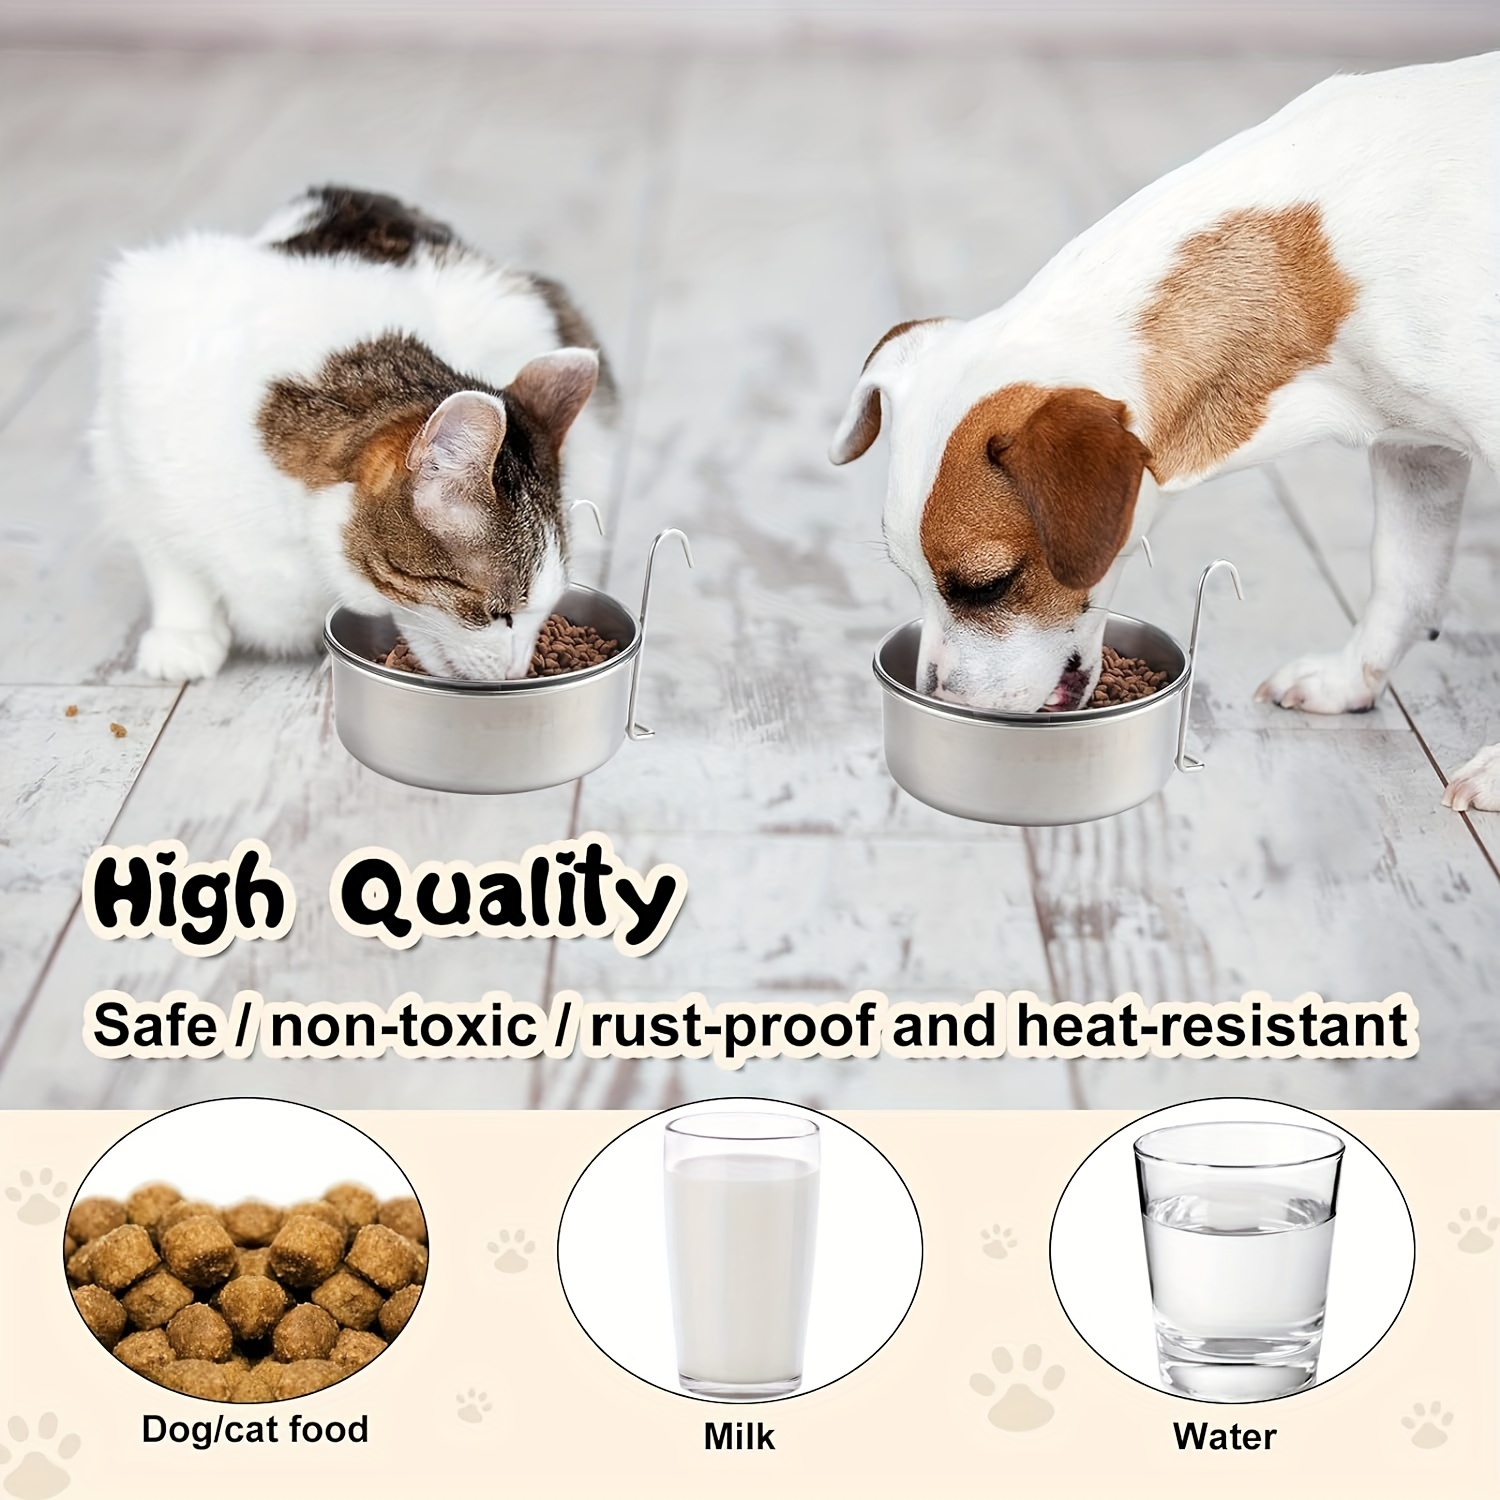 

Stainless Steel Dog Bowl, Hanging Dog Food Bowl Water Basin With Holder, Pet Cage Feeding Supplies